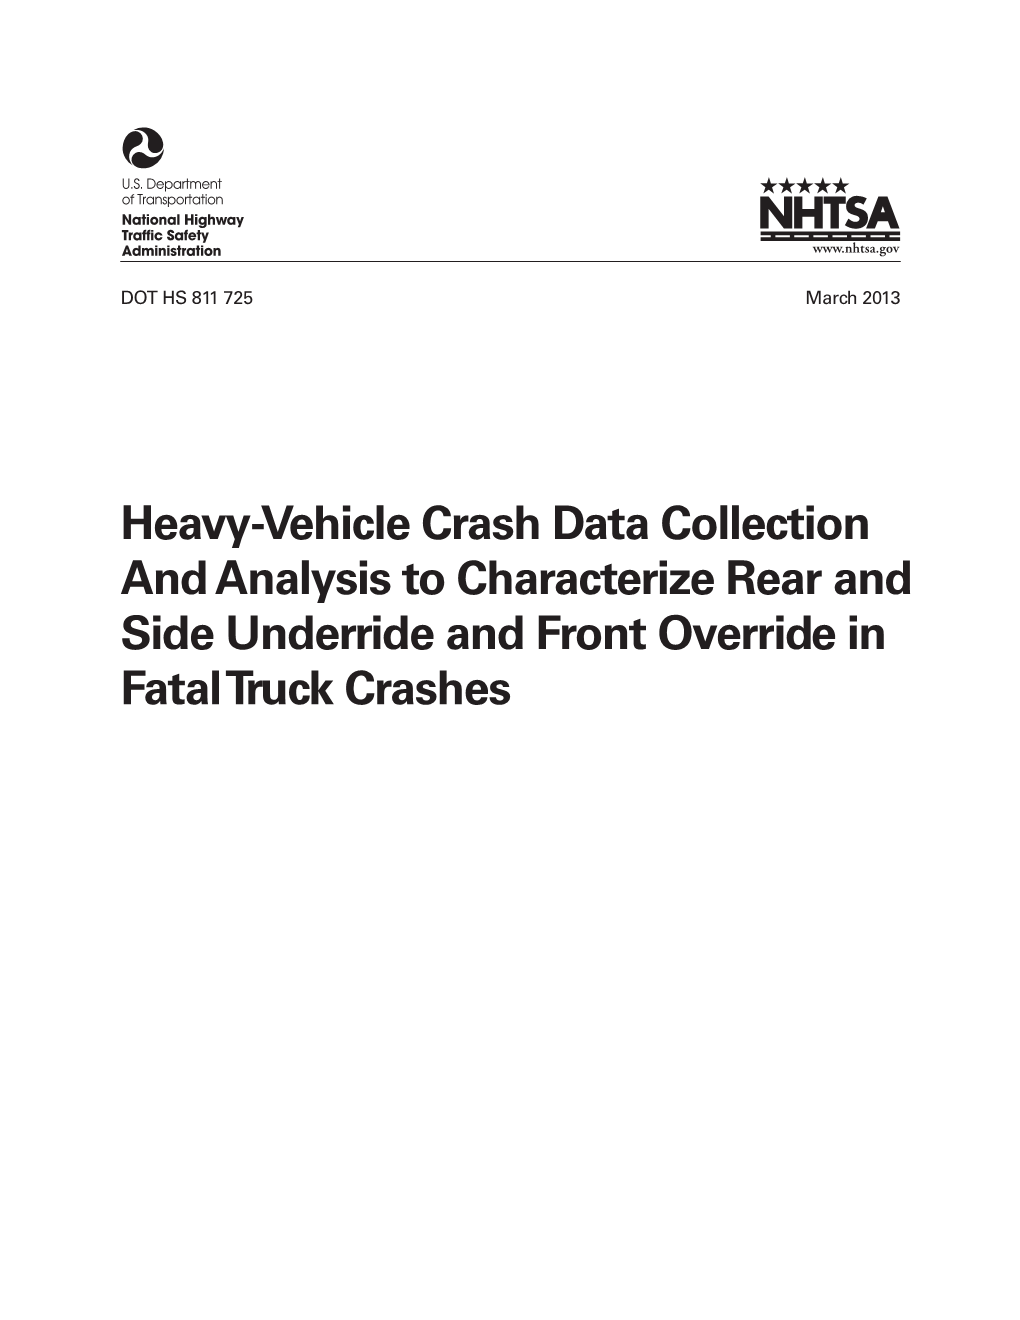 Rear and Side Underride and Front Override in Fatal Truck Crashes DISCLAIMER